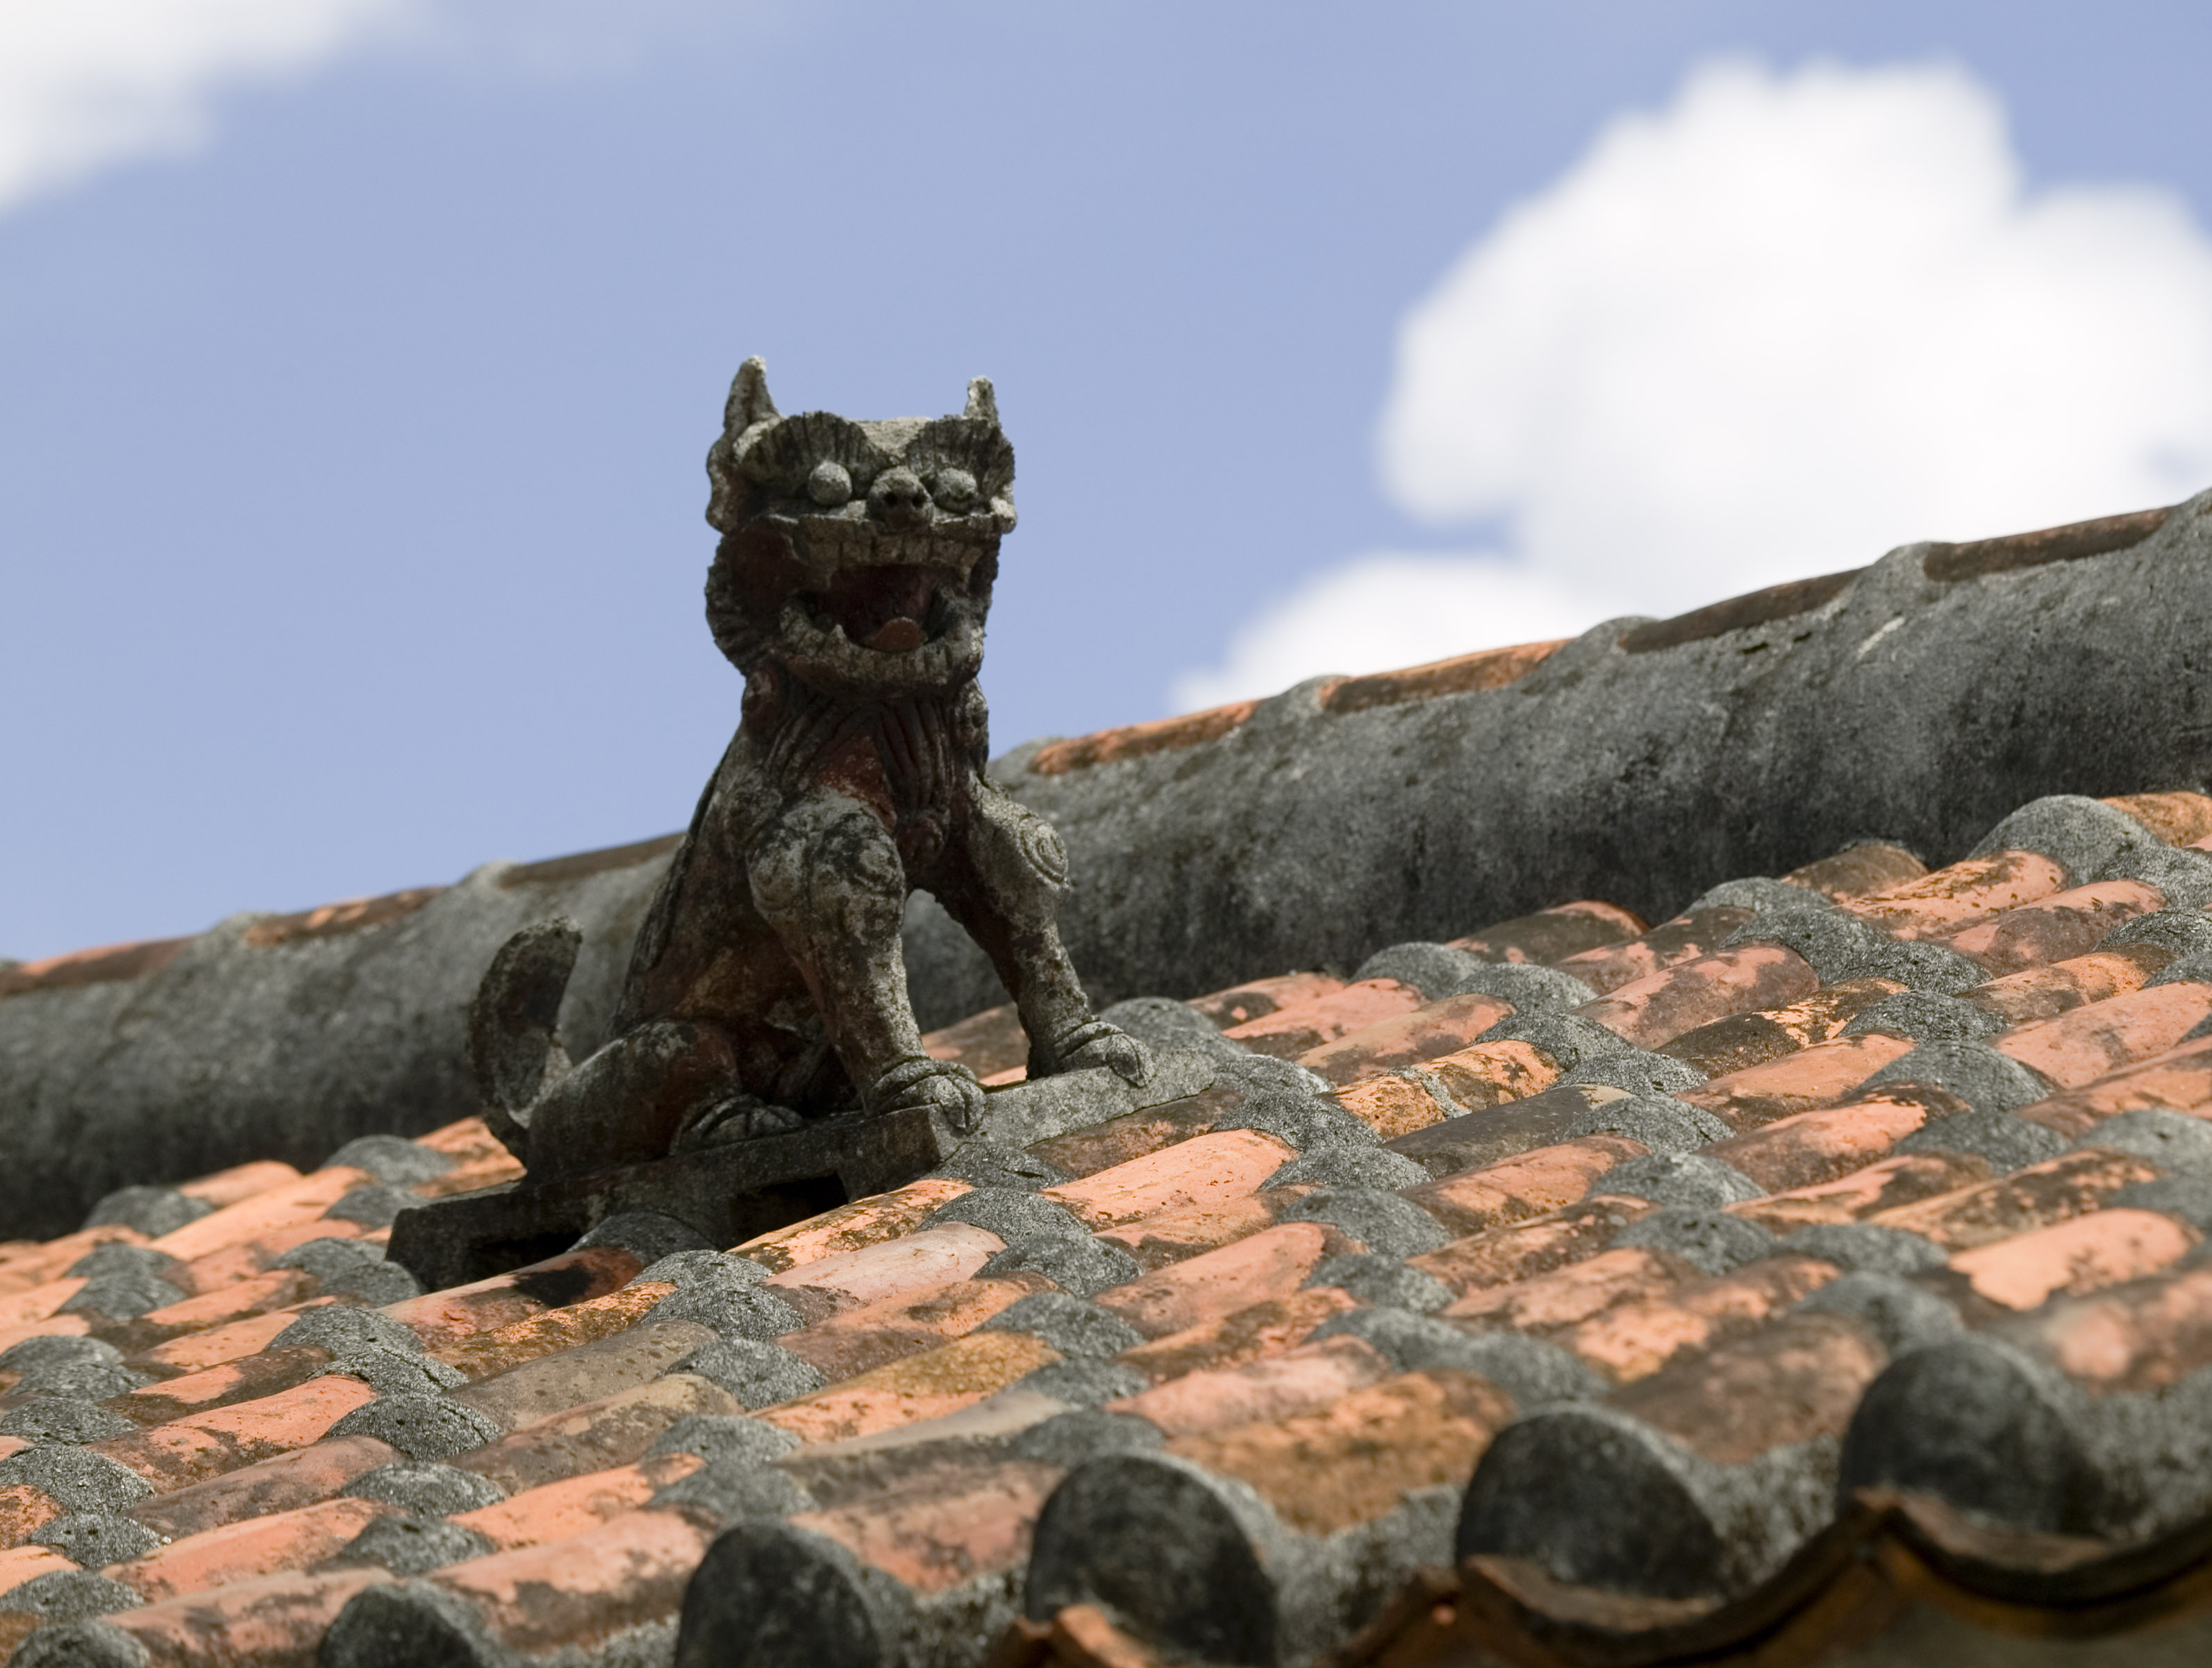 photo,material,free,landscape,picture,stock photo,Creative Commons,Sea Sir to bark, SeSir, good luck charm, Okinawa, roof